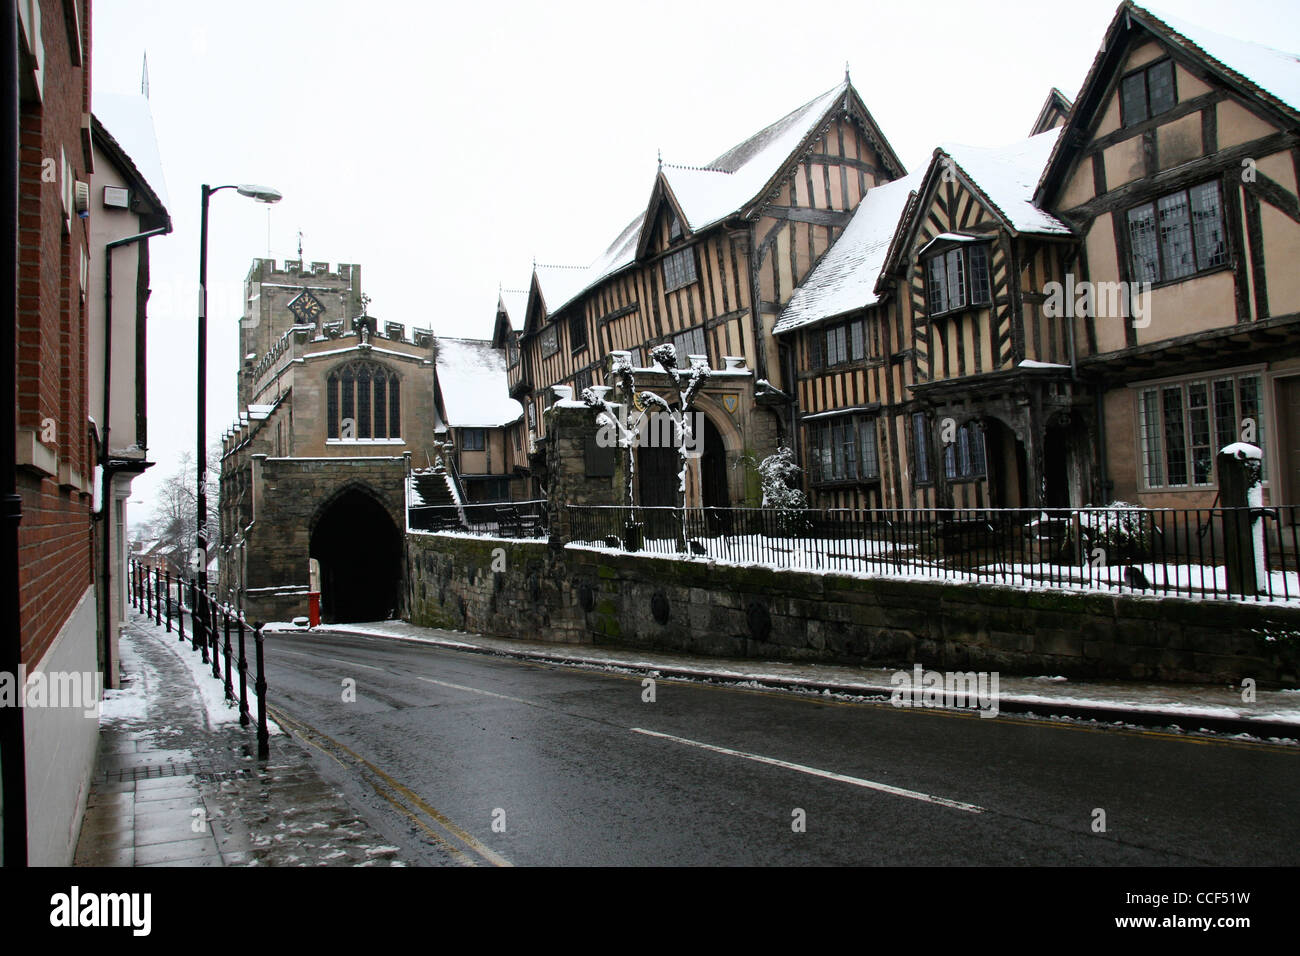 Historic Lord Leycester Hospital building in Warwick UK, on a winter's day Stock Photo